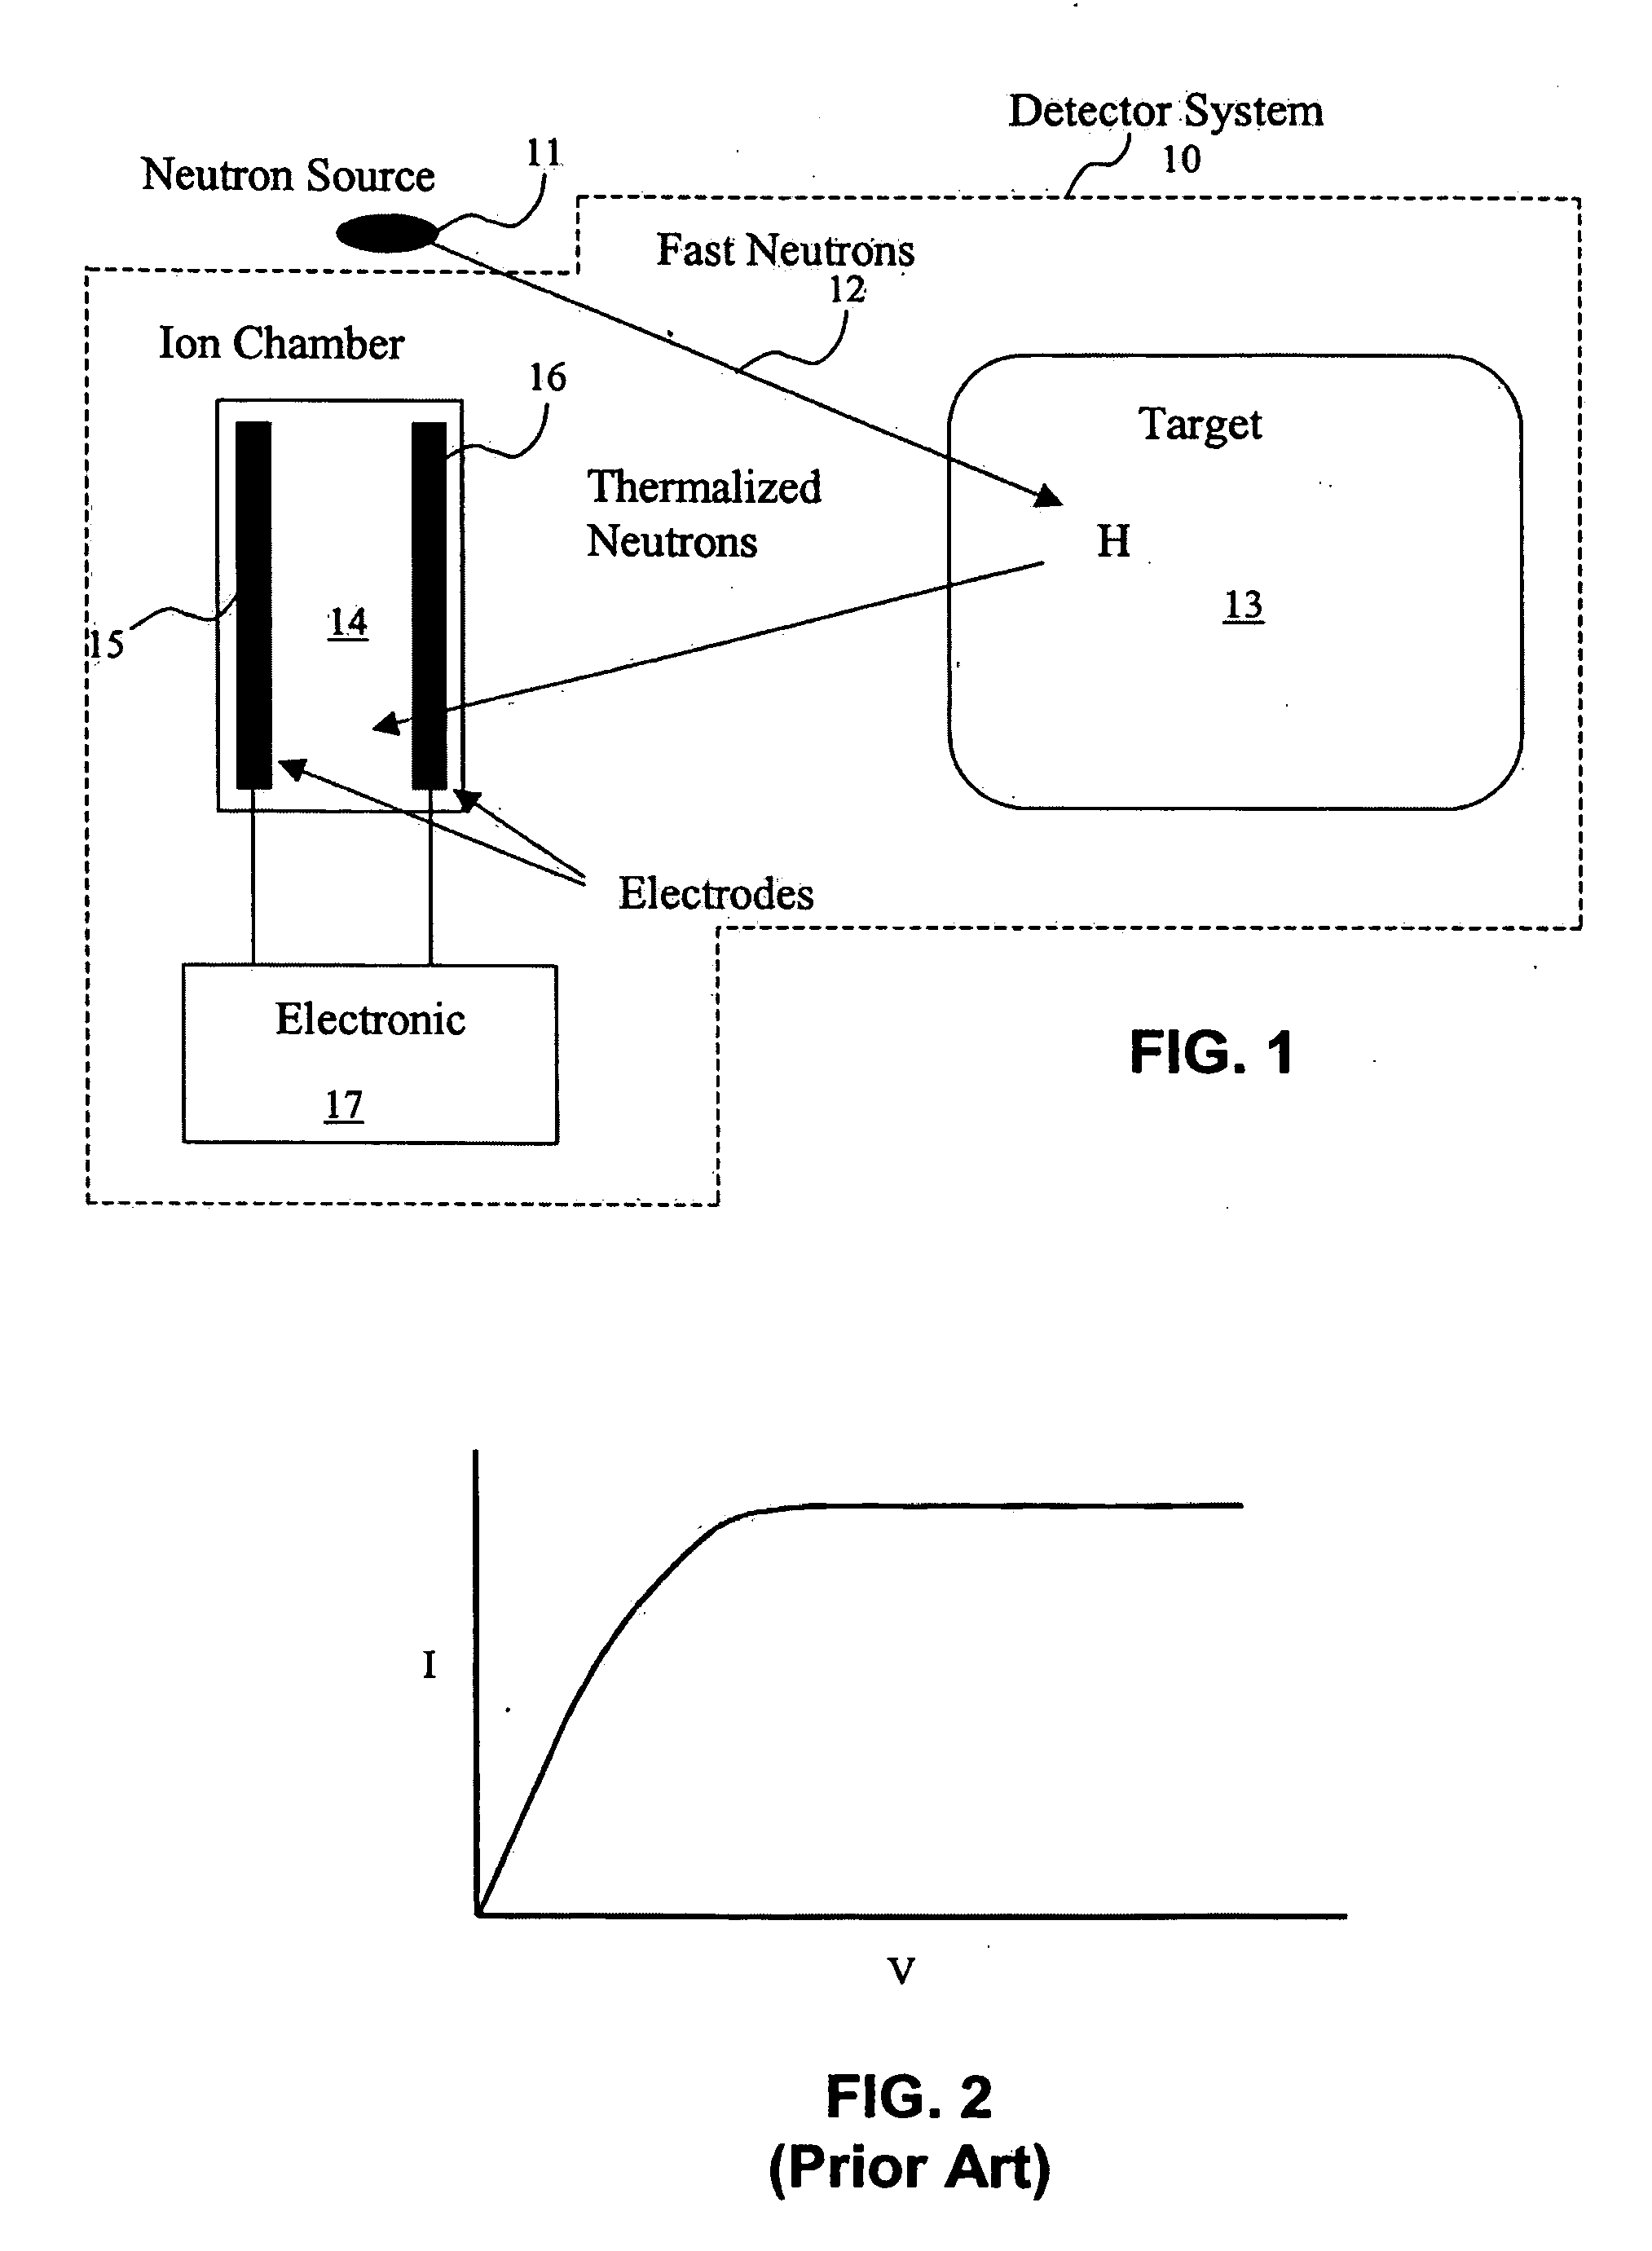 Method and apparatus for detecting high-energy radiation using a pulse mode ion chamber